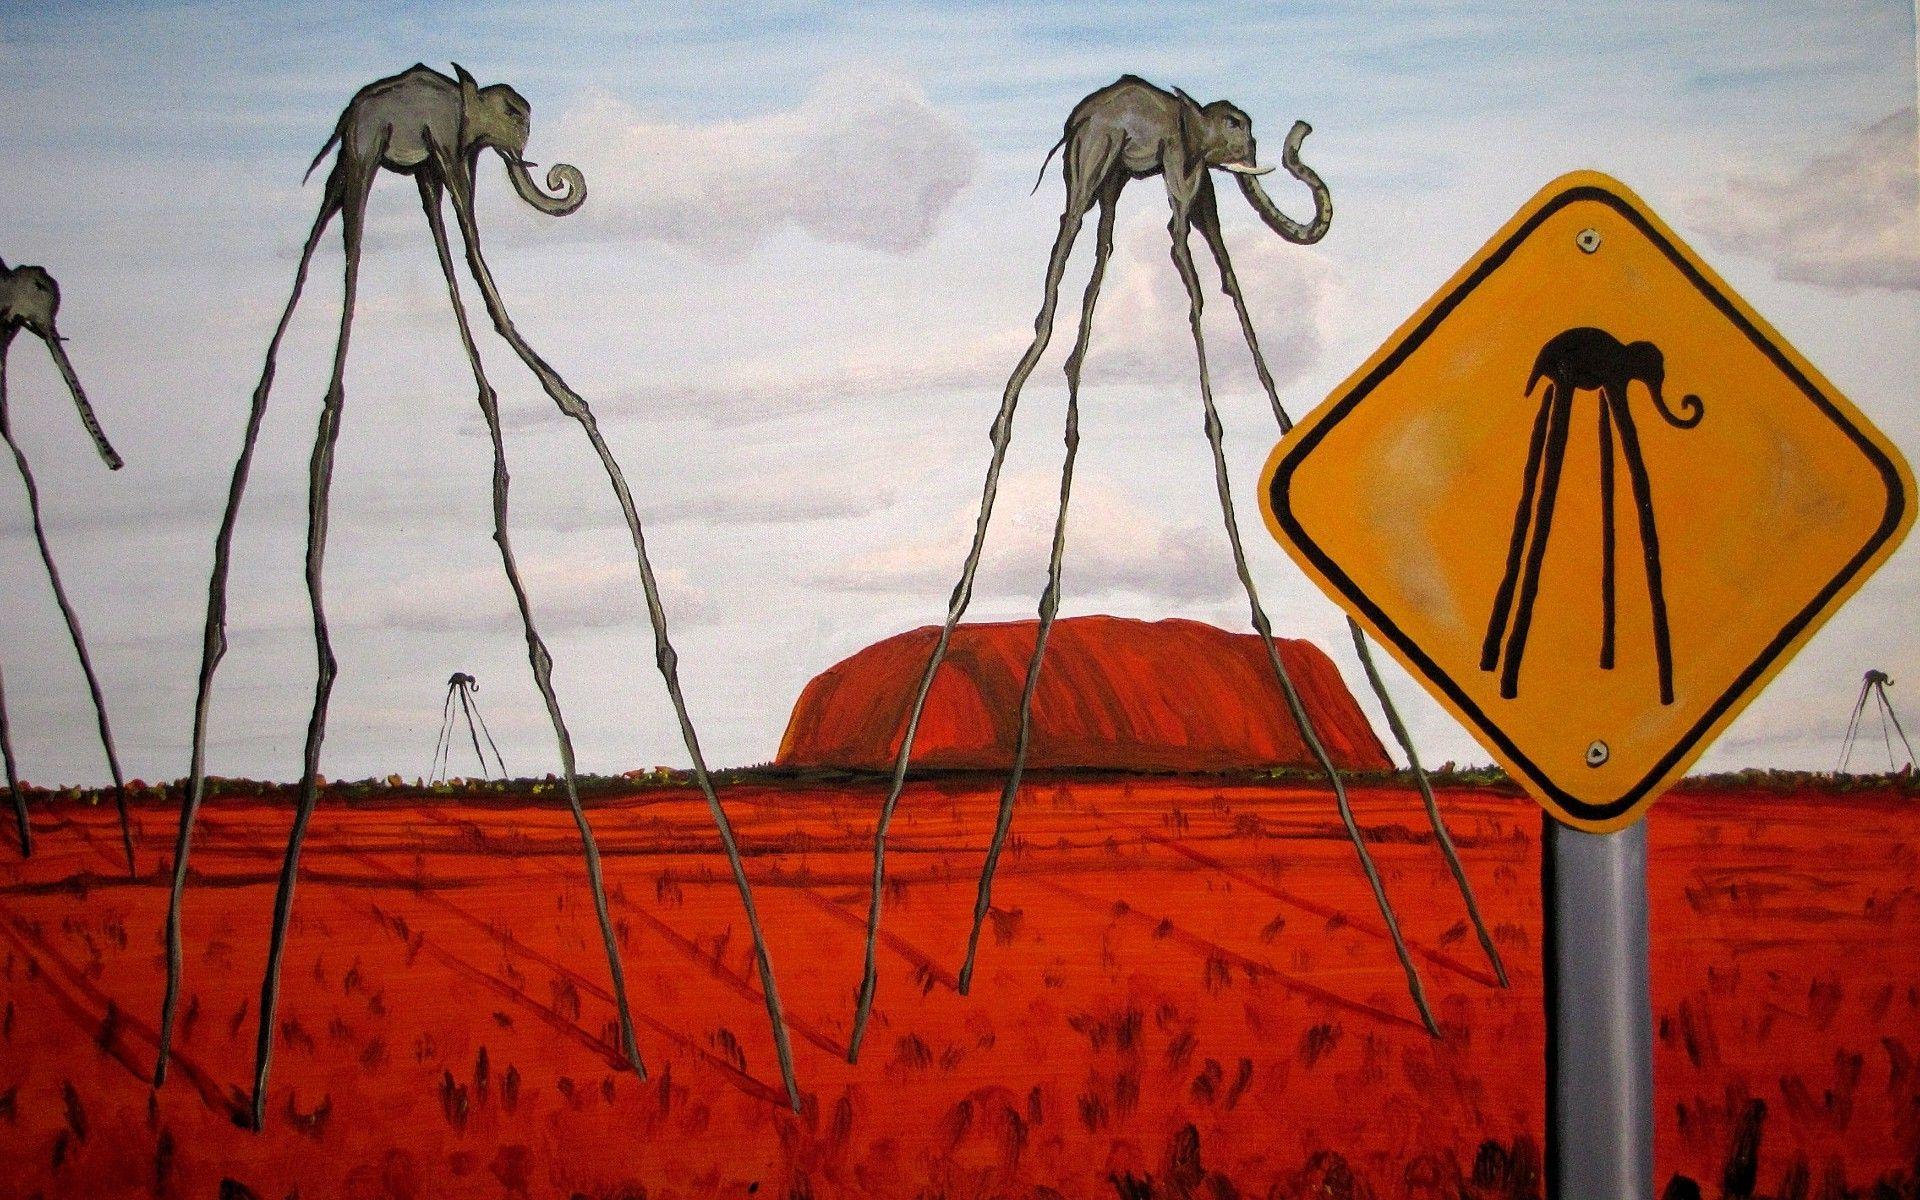 fantasy Art, Surreal, Clouds, Elephants, Signs, Hill, Nature